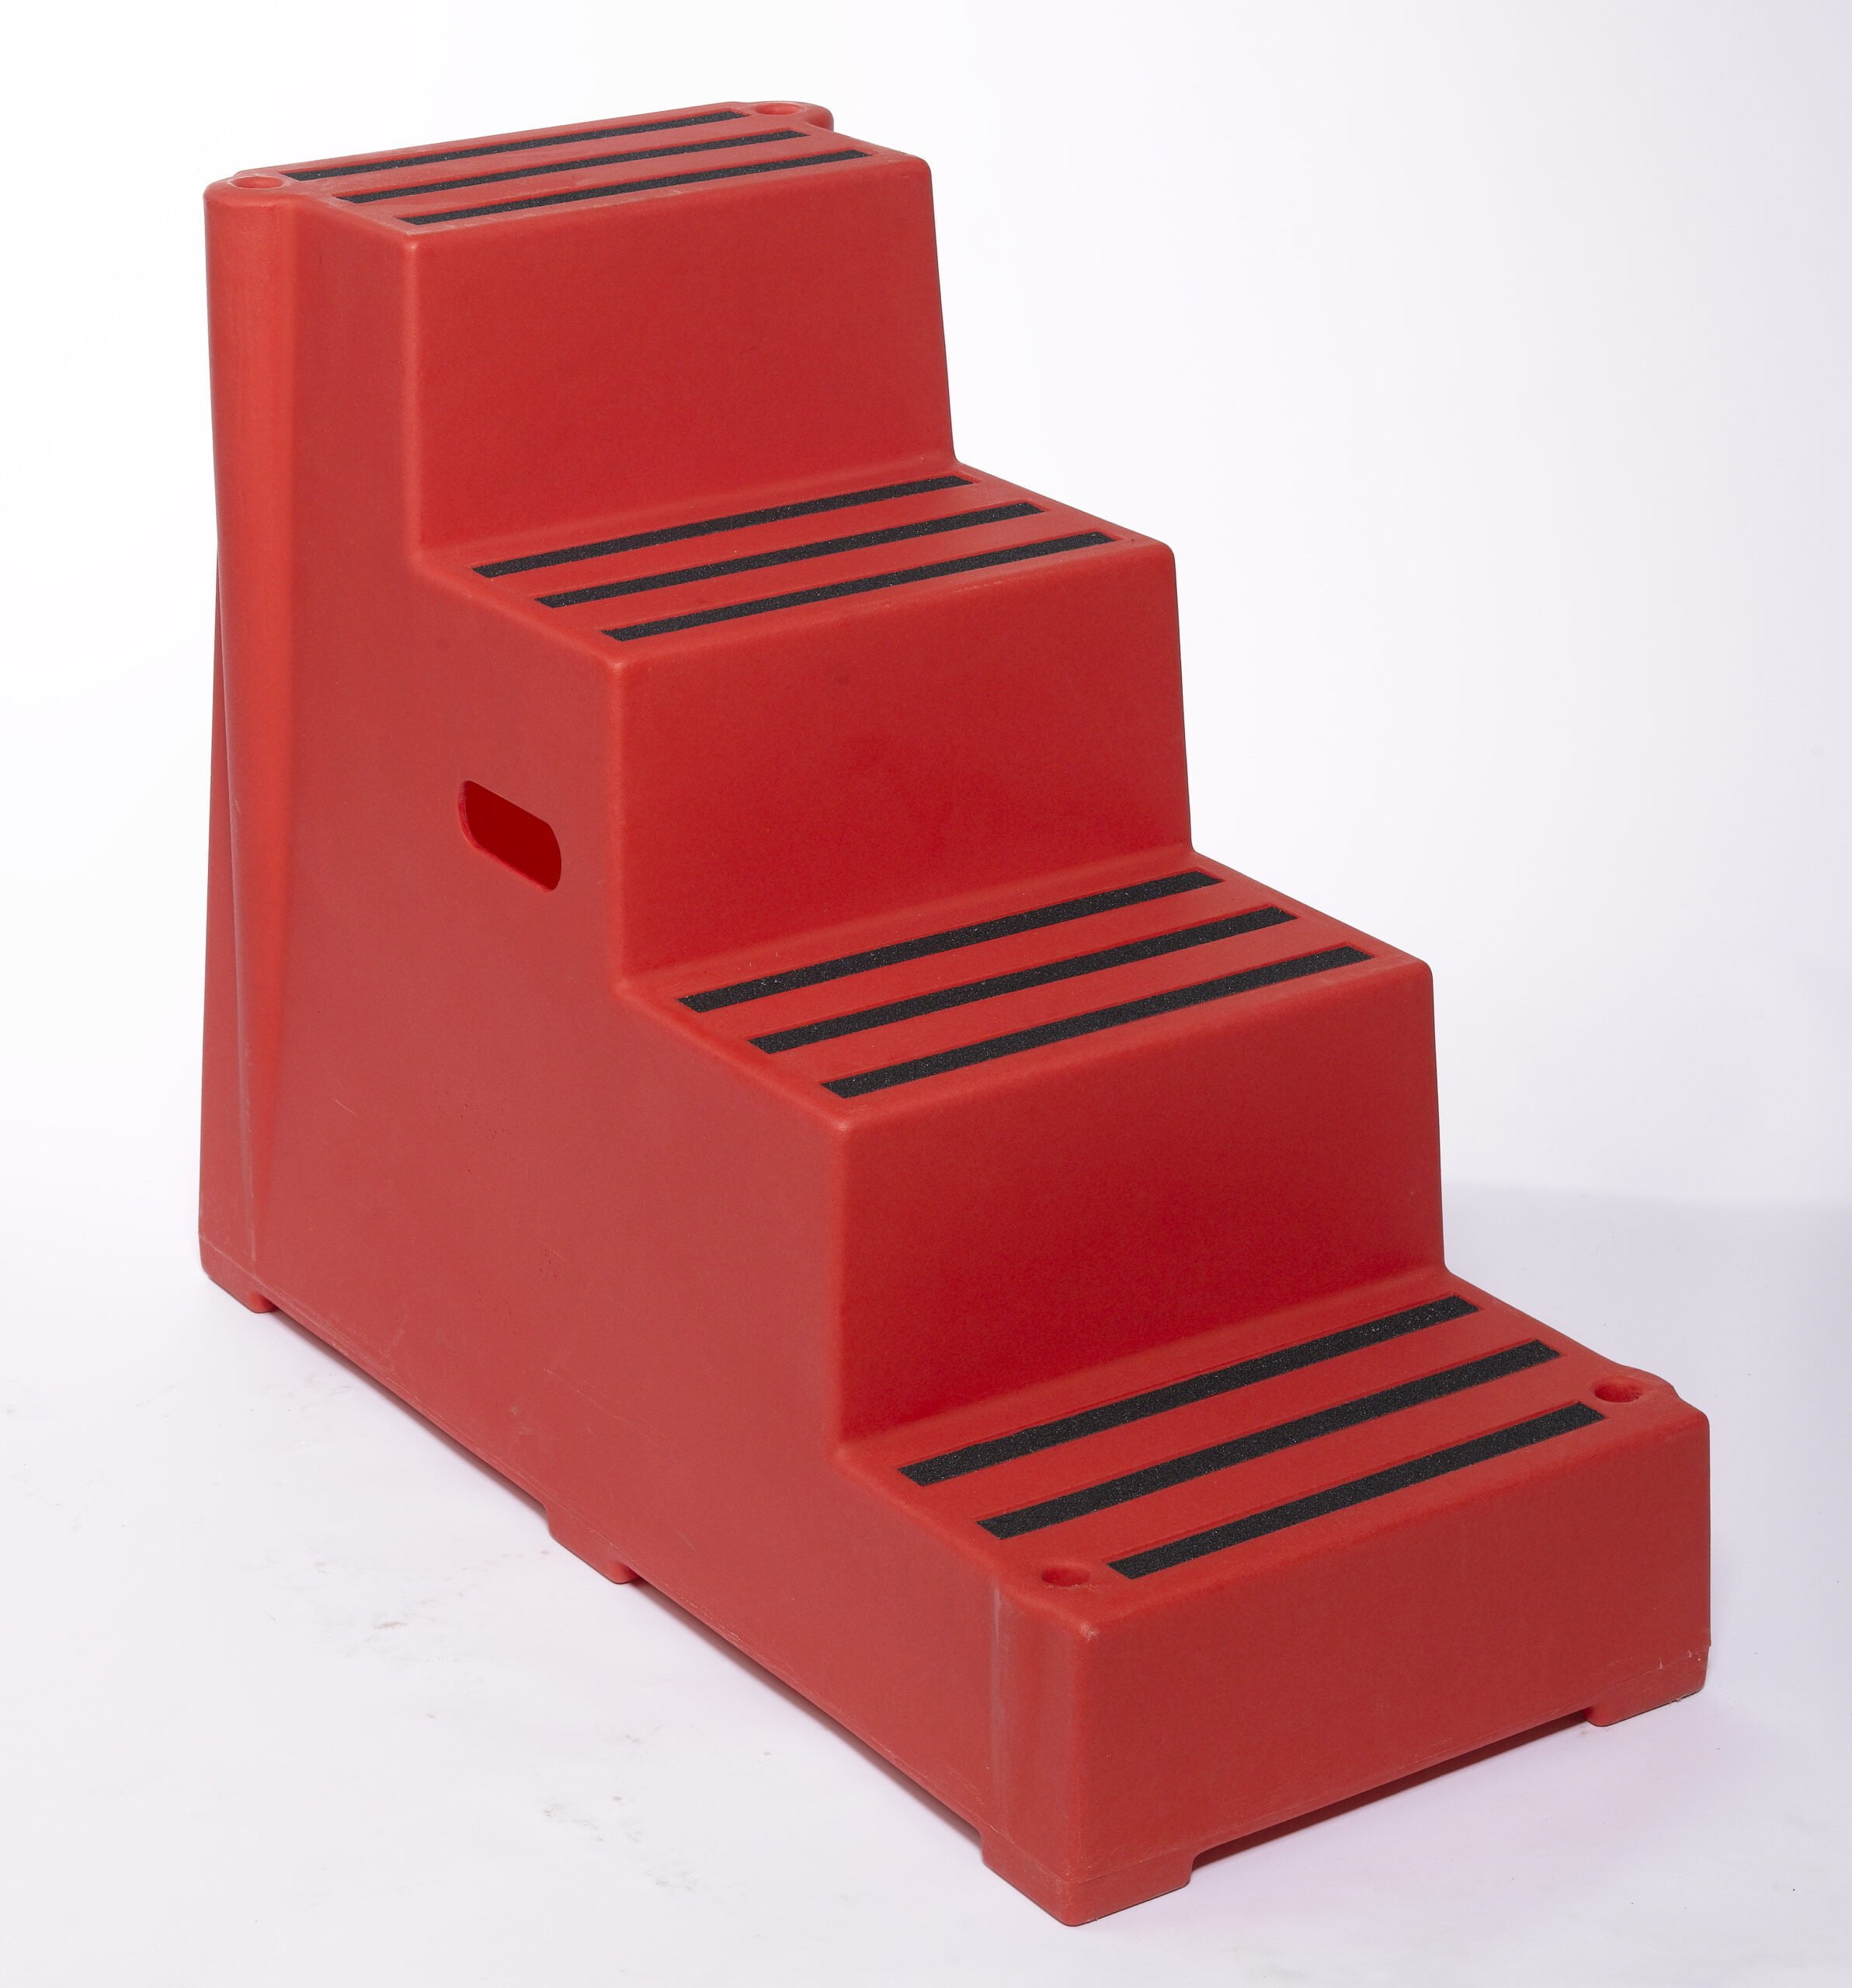 Excelsior 4 Tread Heavy Duty Plastic Step